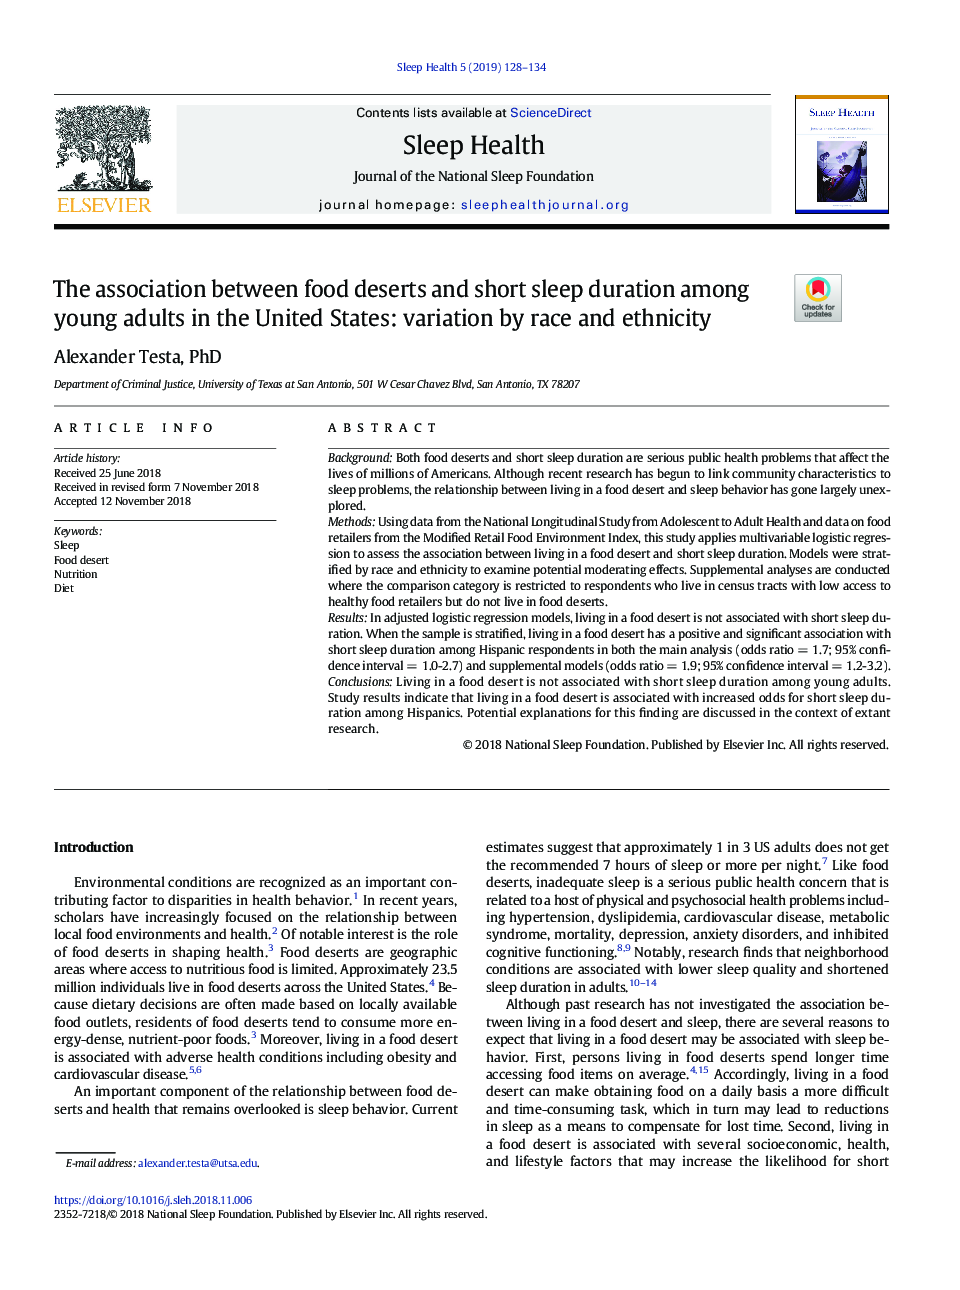 The association between food deserts and short sleep duration among young adults in the United States: variation by race and ethnicity